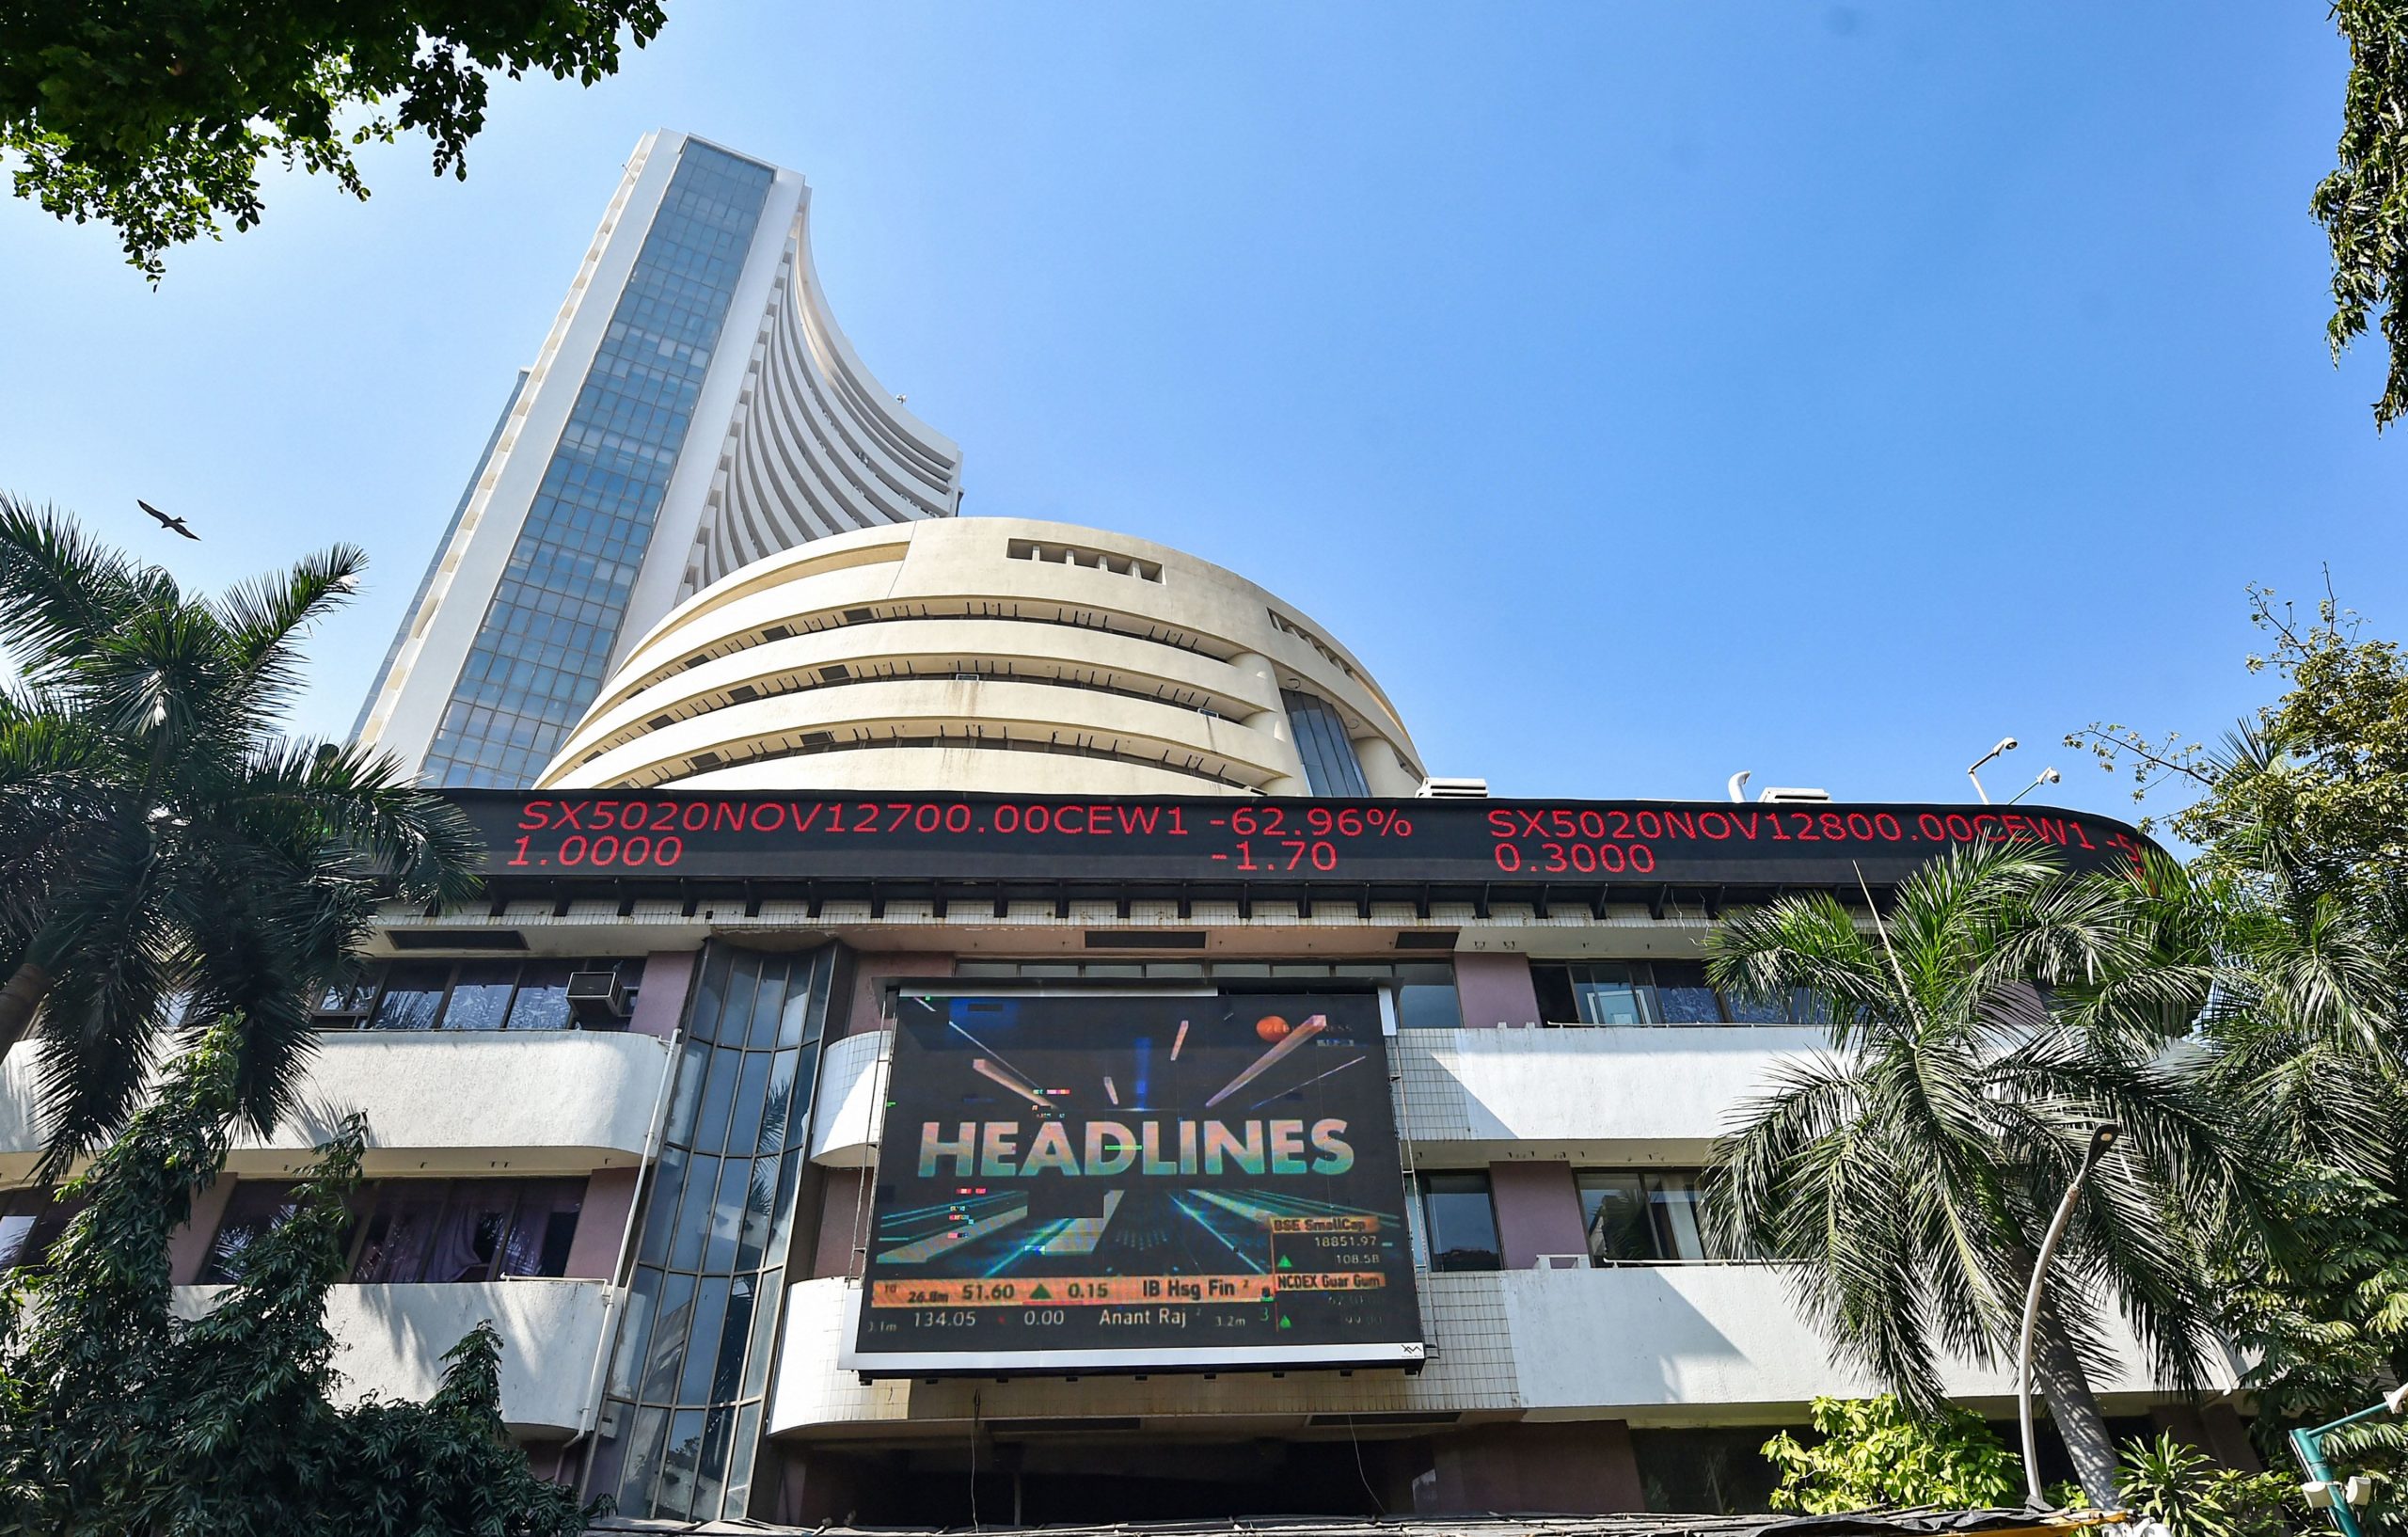 Trending Stocks: Maruti Suzuki, Vedanta, Federal Bank, Marico and others in news today